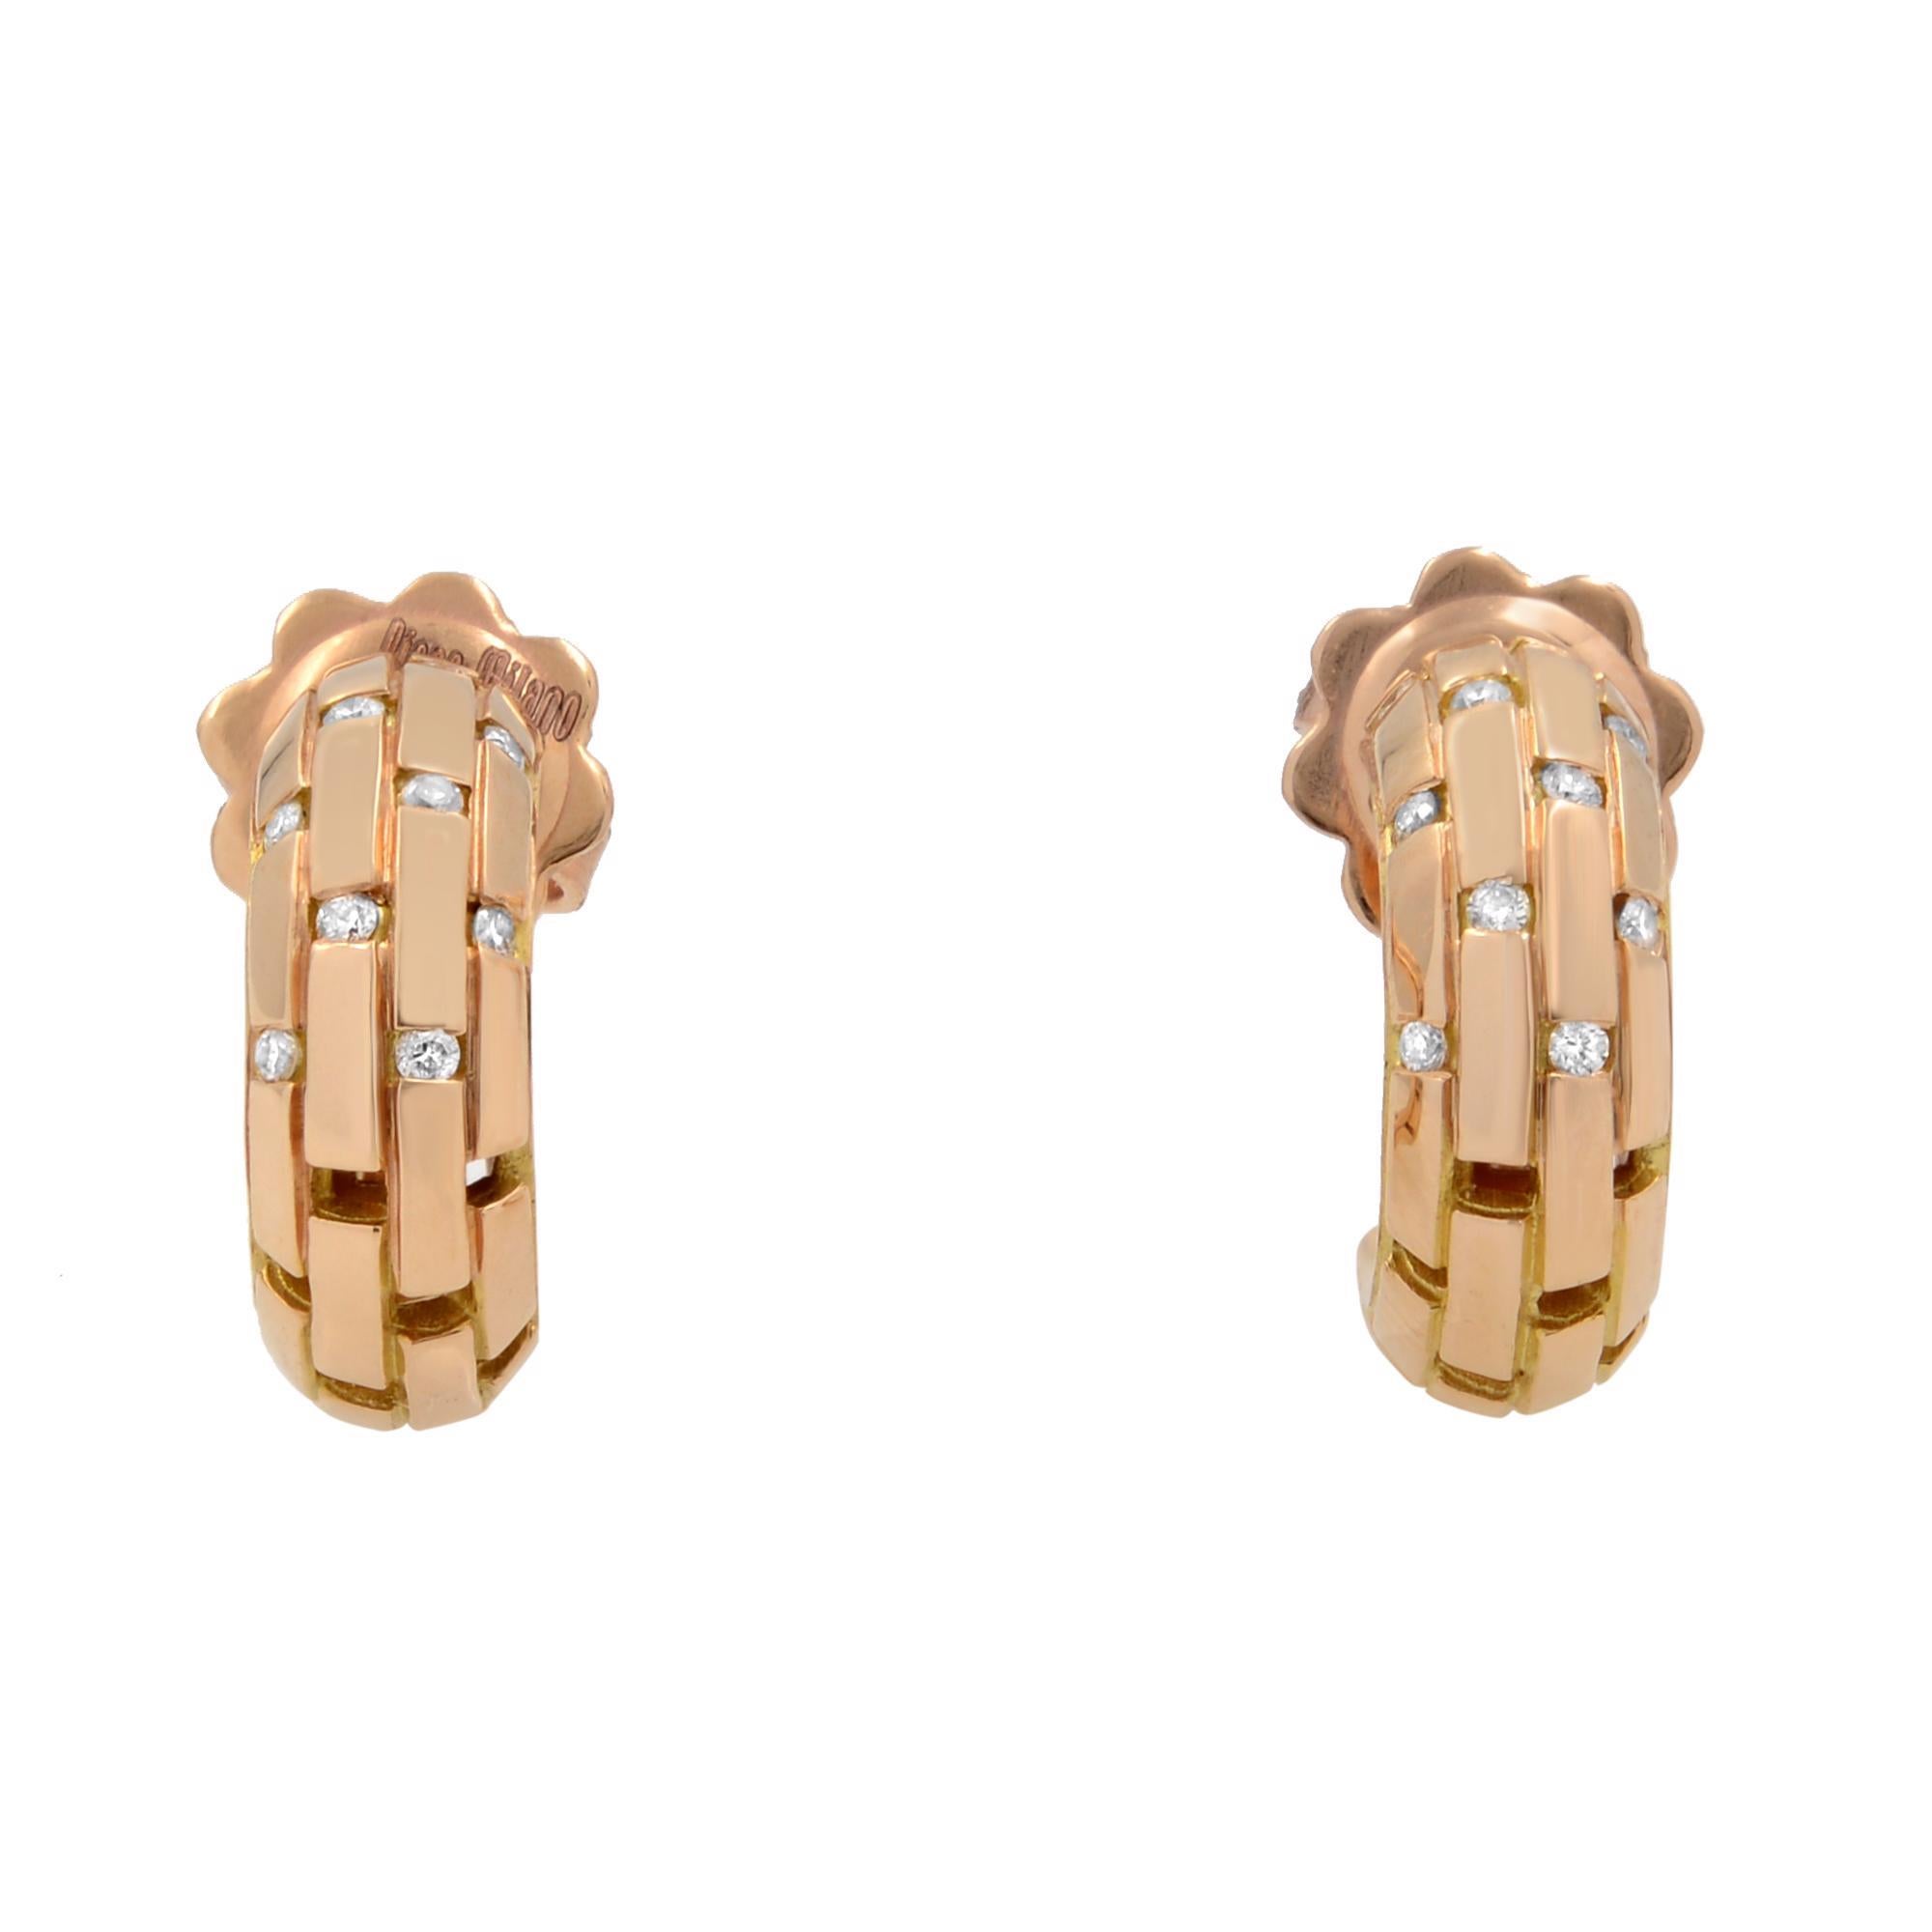 Piero Milano natural diamond Huggie earrings in 18k rose gold. These unique diamonds will give you the glamorous look every girl deserves. Total carat weight: 0.10. Diamond color: G-H and VS clarity. Comes with a box and Chronostore appraisal.